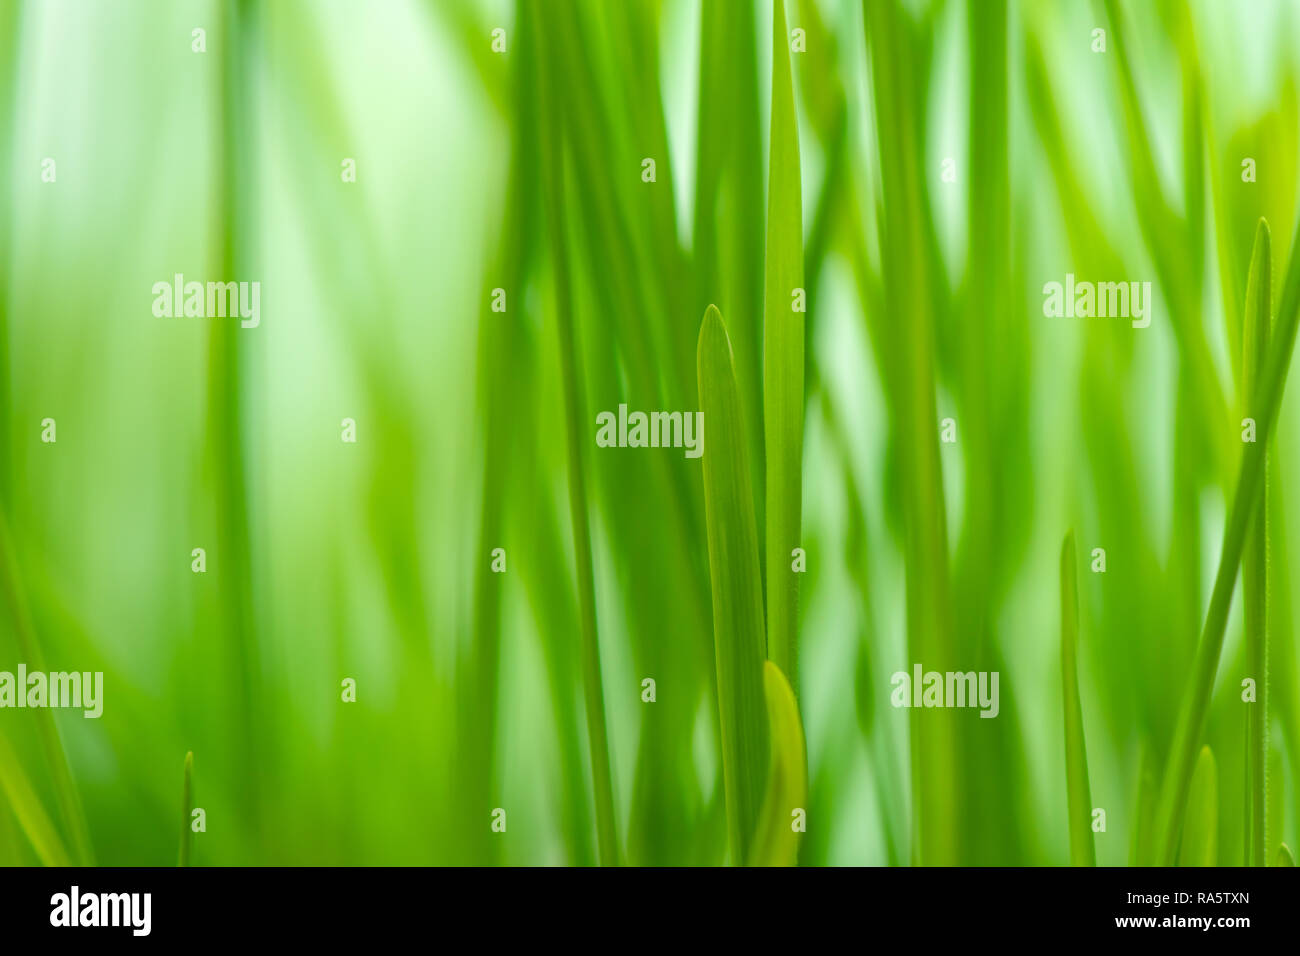 Defocus green spring grass as abstract natural background Stock Photo